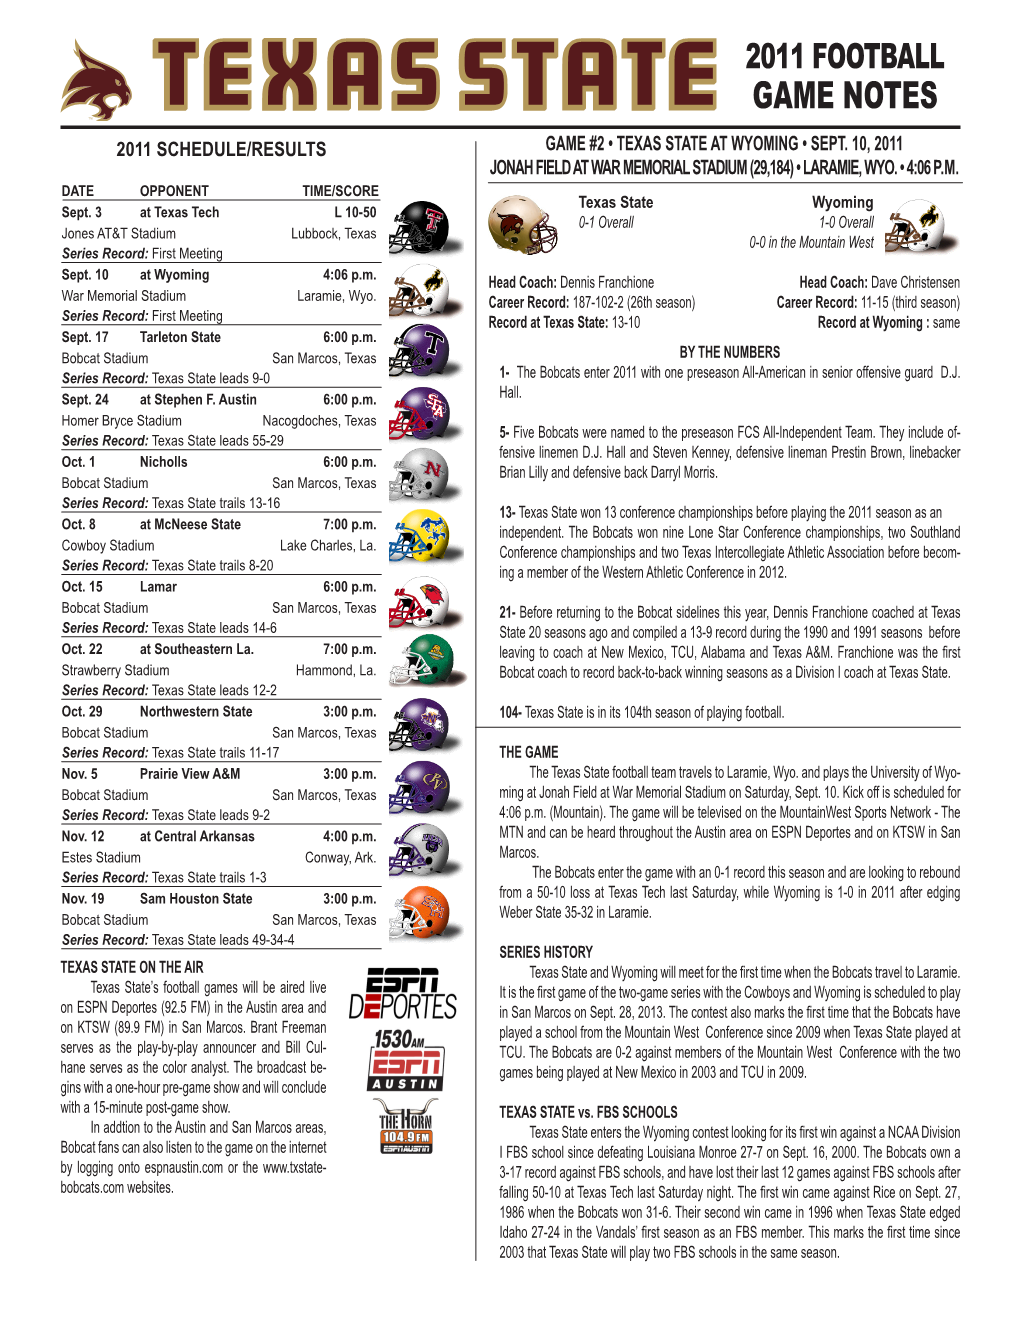 2011 Football Game Notes